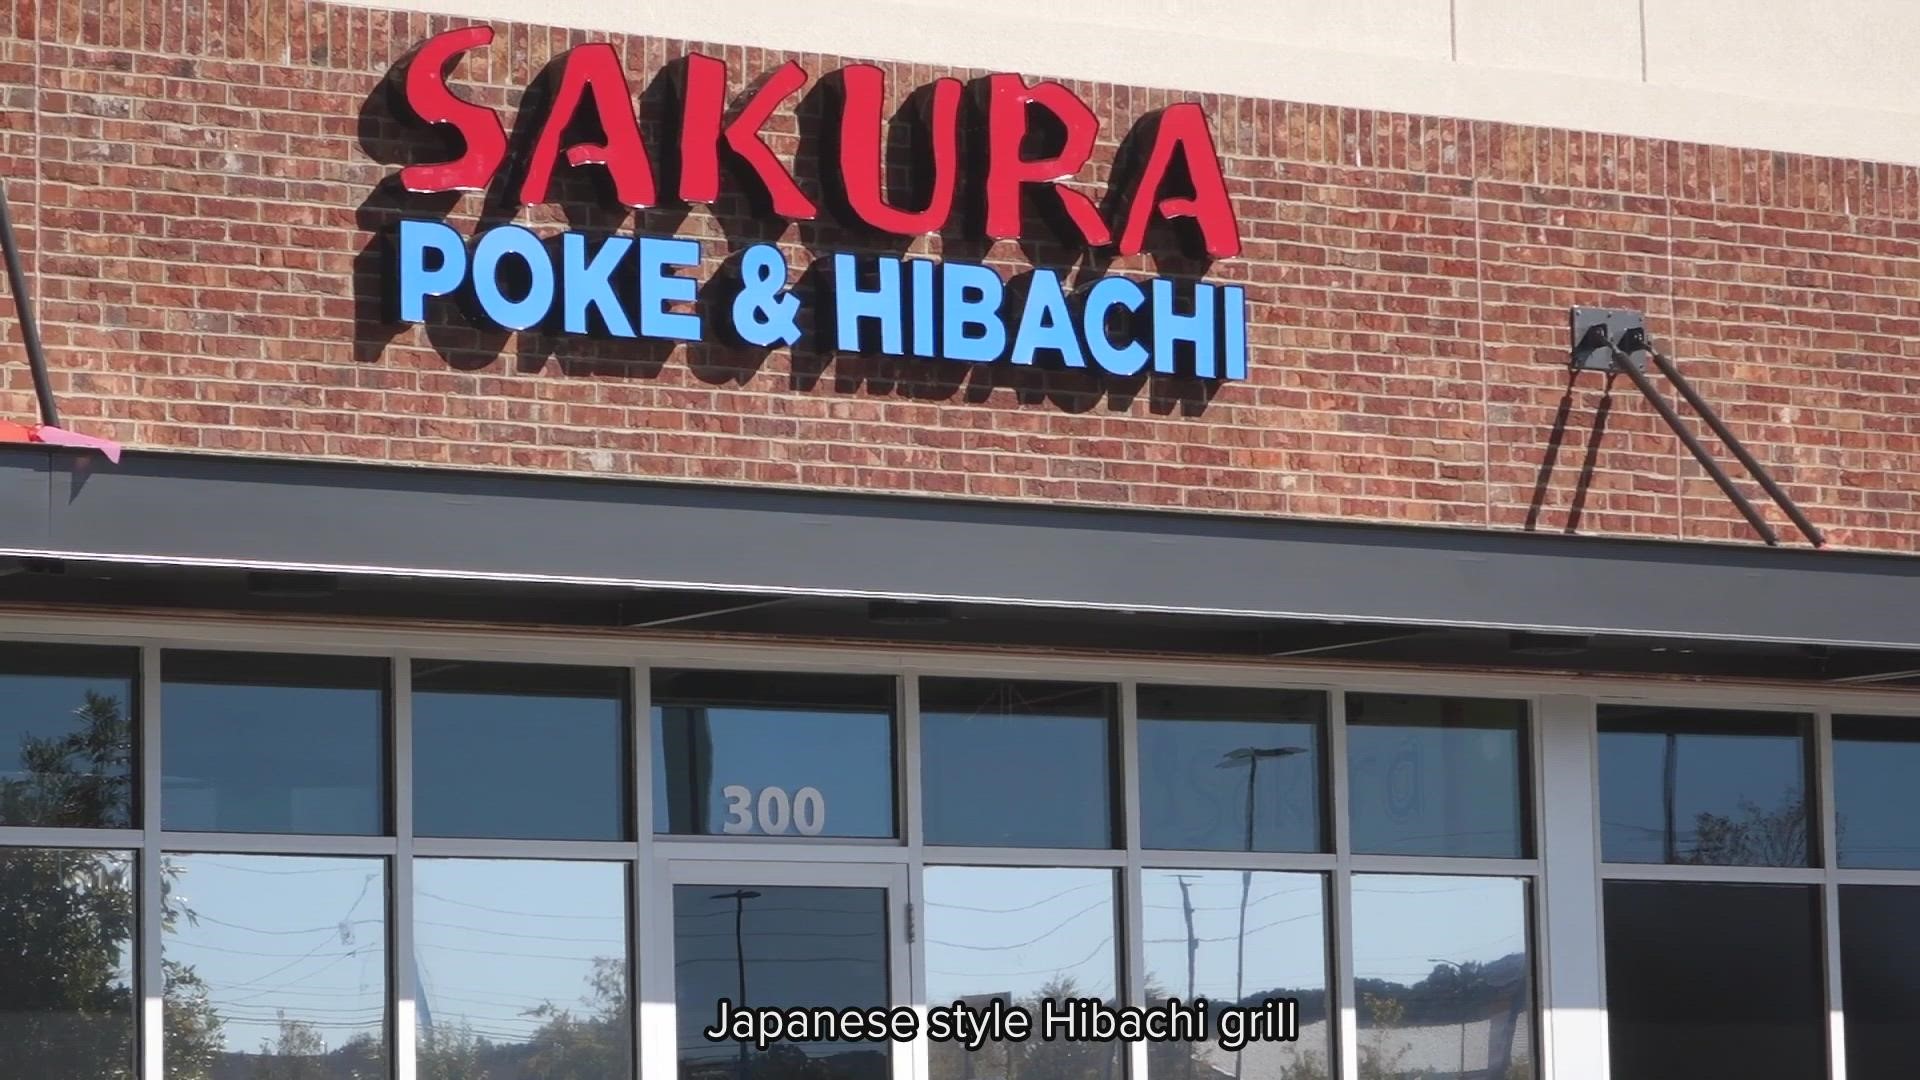 A new Japanese restaurant is now open in west Macon. Sakura Poke and Hibachi is one of the newest places in the Tobesofkee Crossing shopping center.